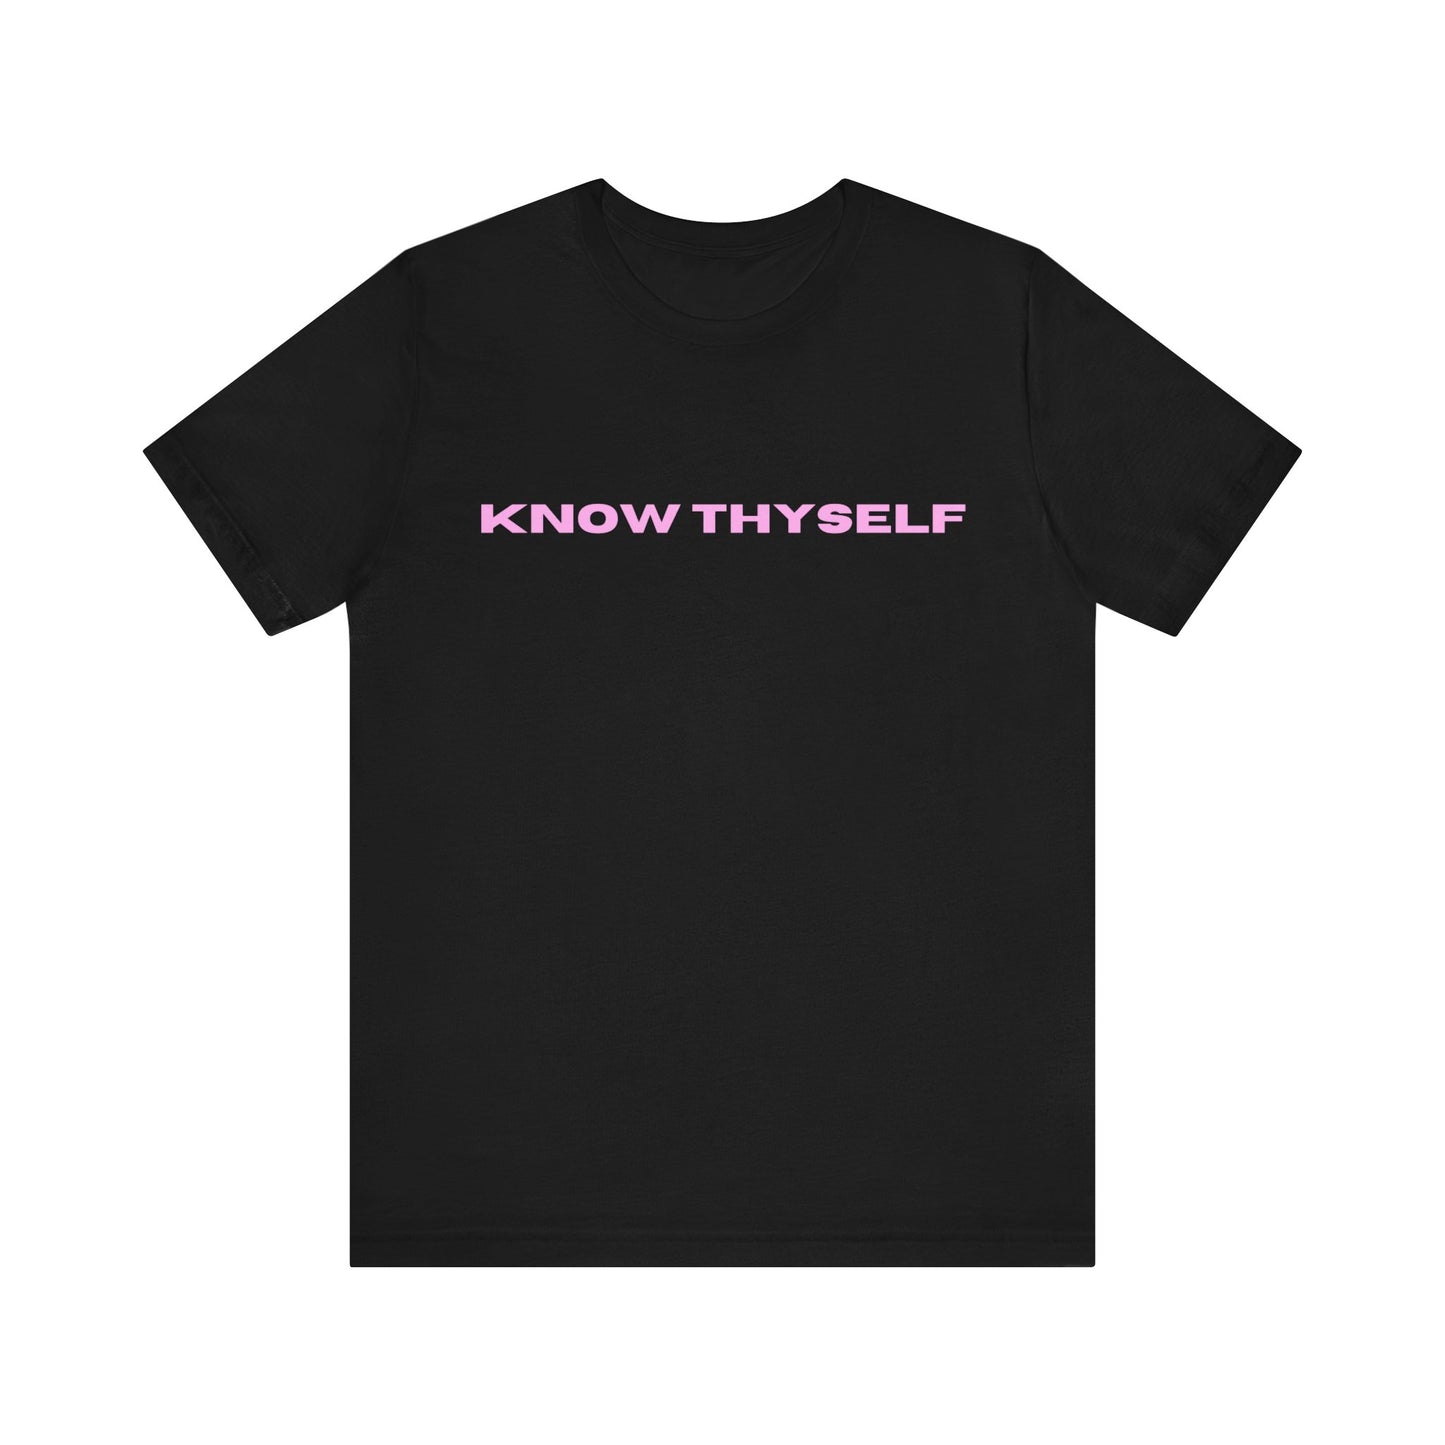 "Know Yourself" Tshirt